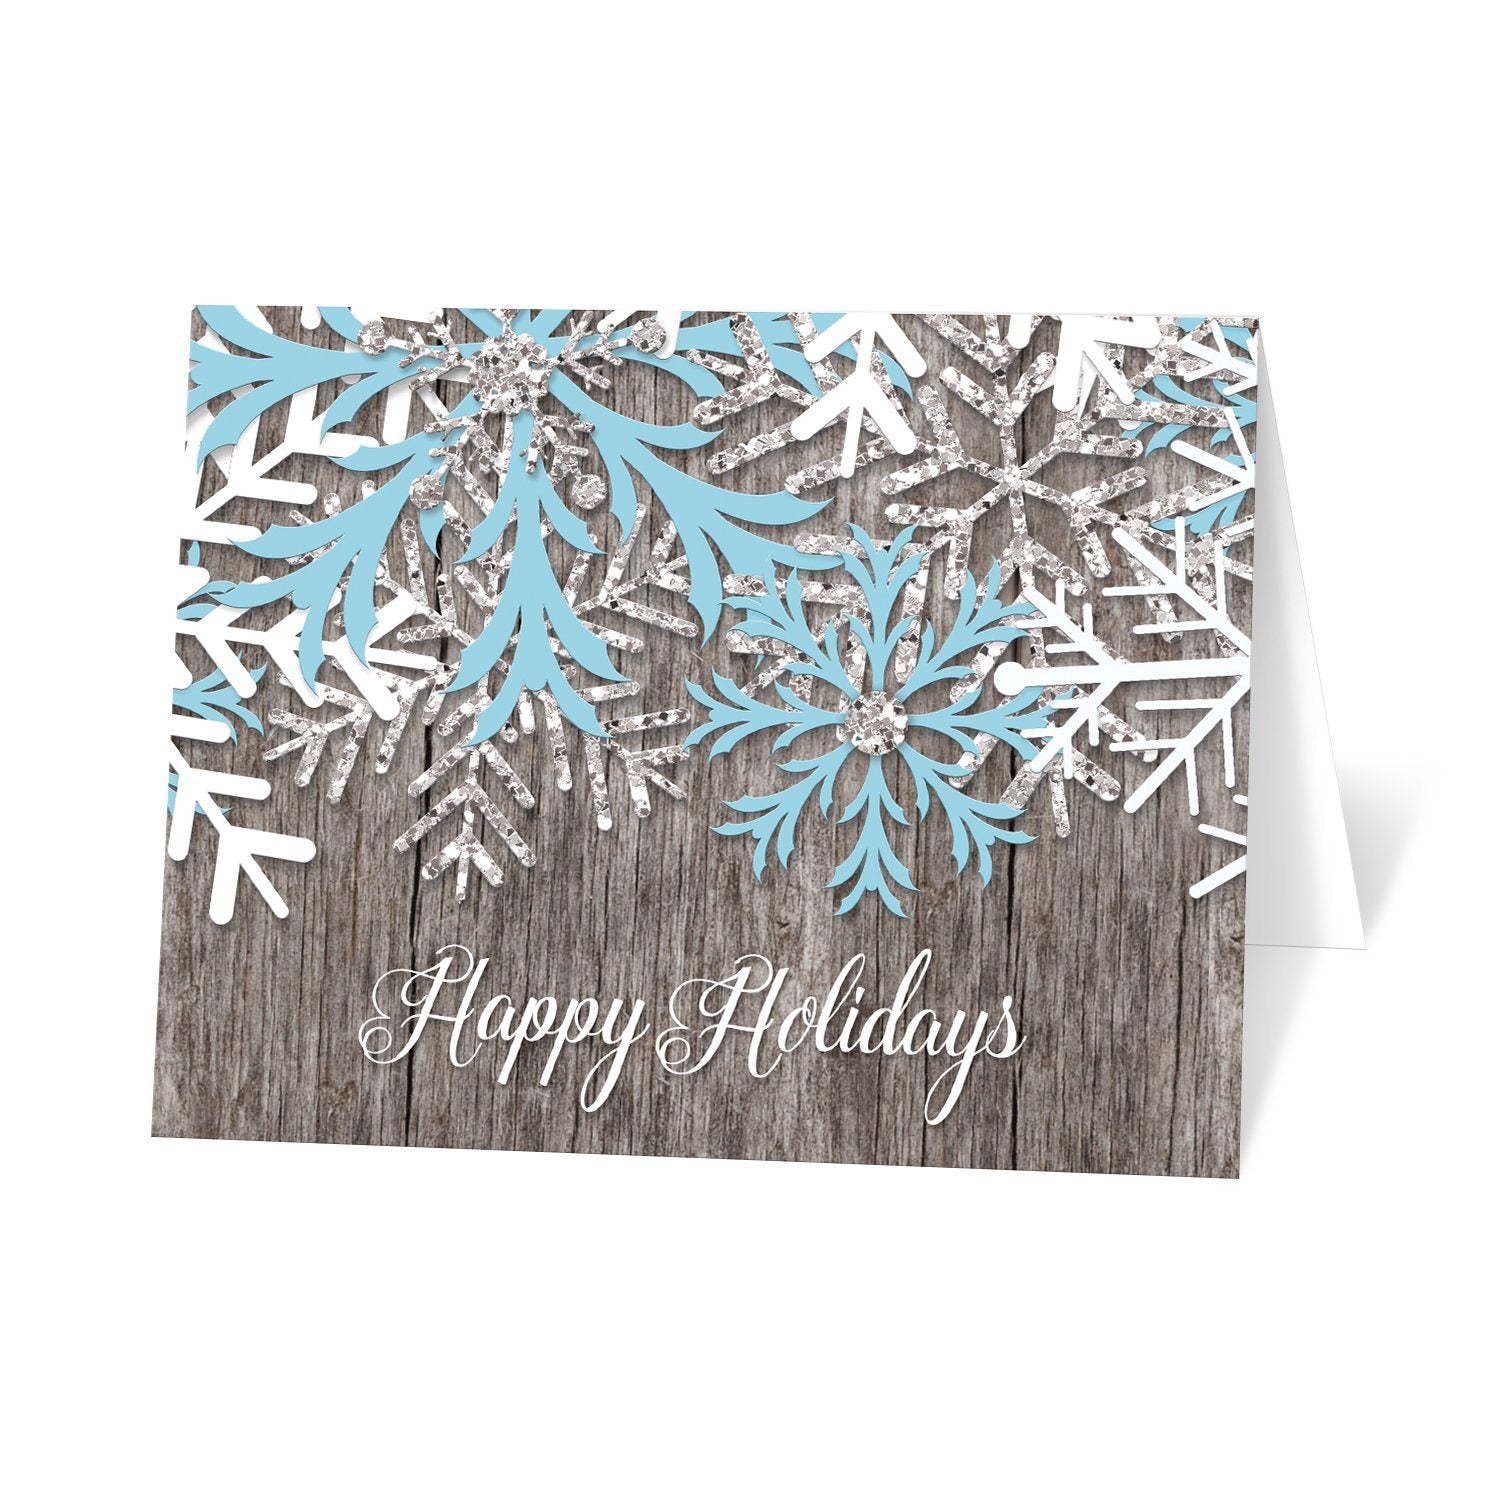 Rustic Winter Wood Blue Snowflake Holiday Cards at Artistically Invited